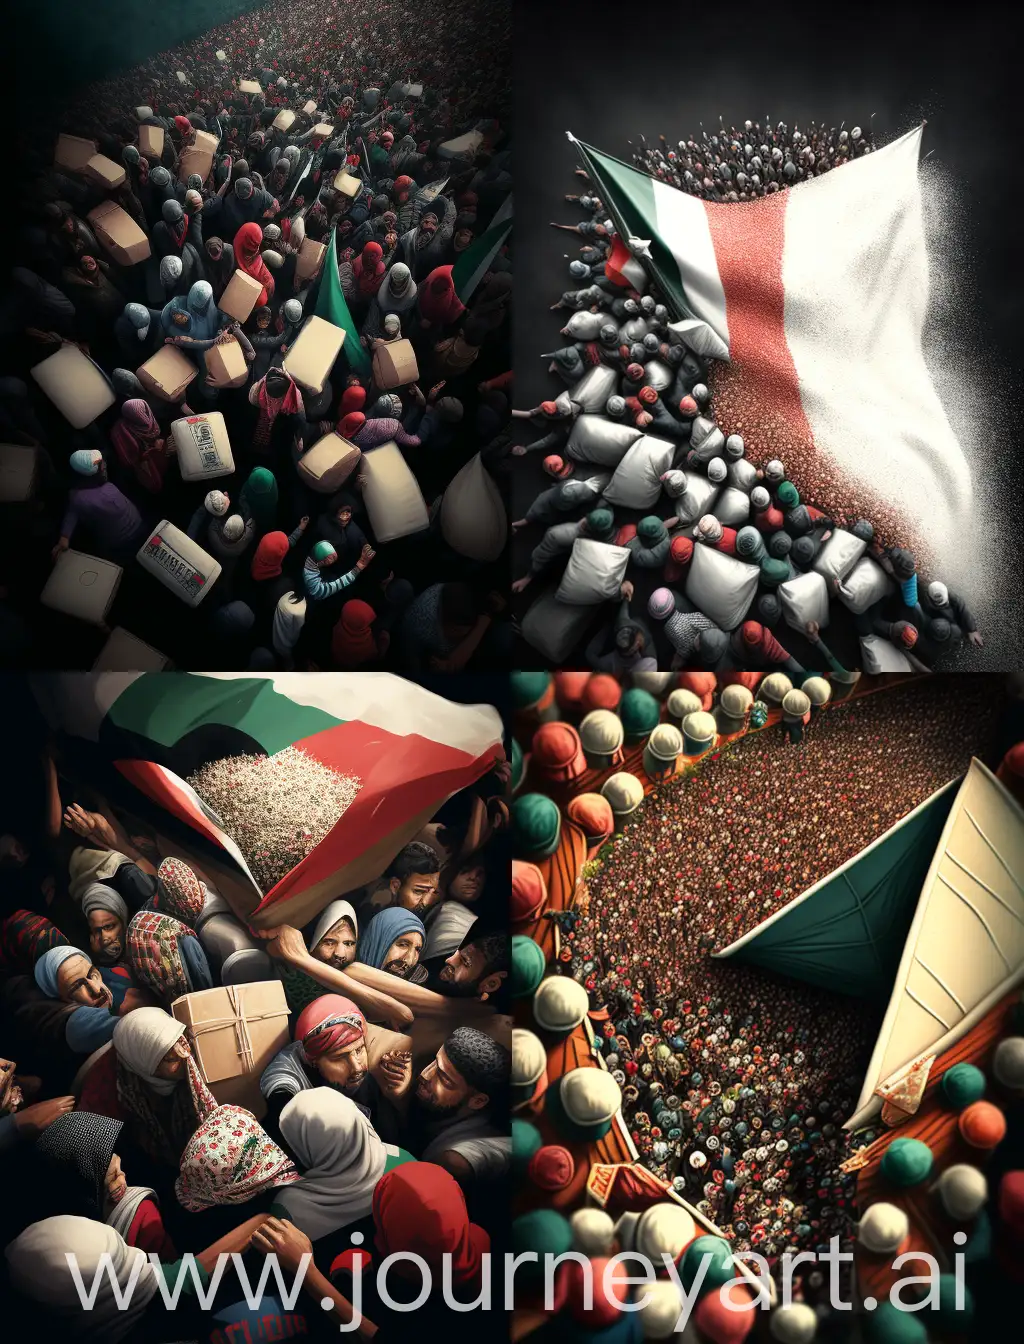 illustration of thousands of hungry Palestinians fighting for food aid. clear image, 3d, high resolution.